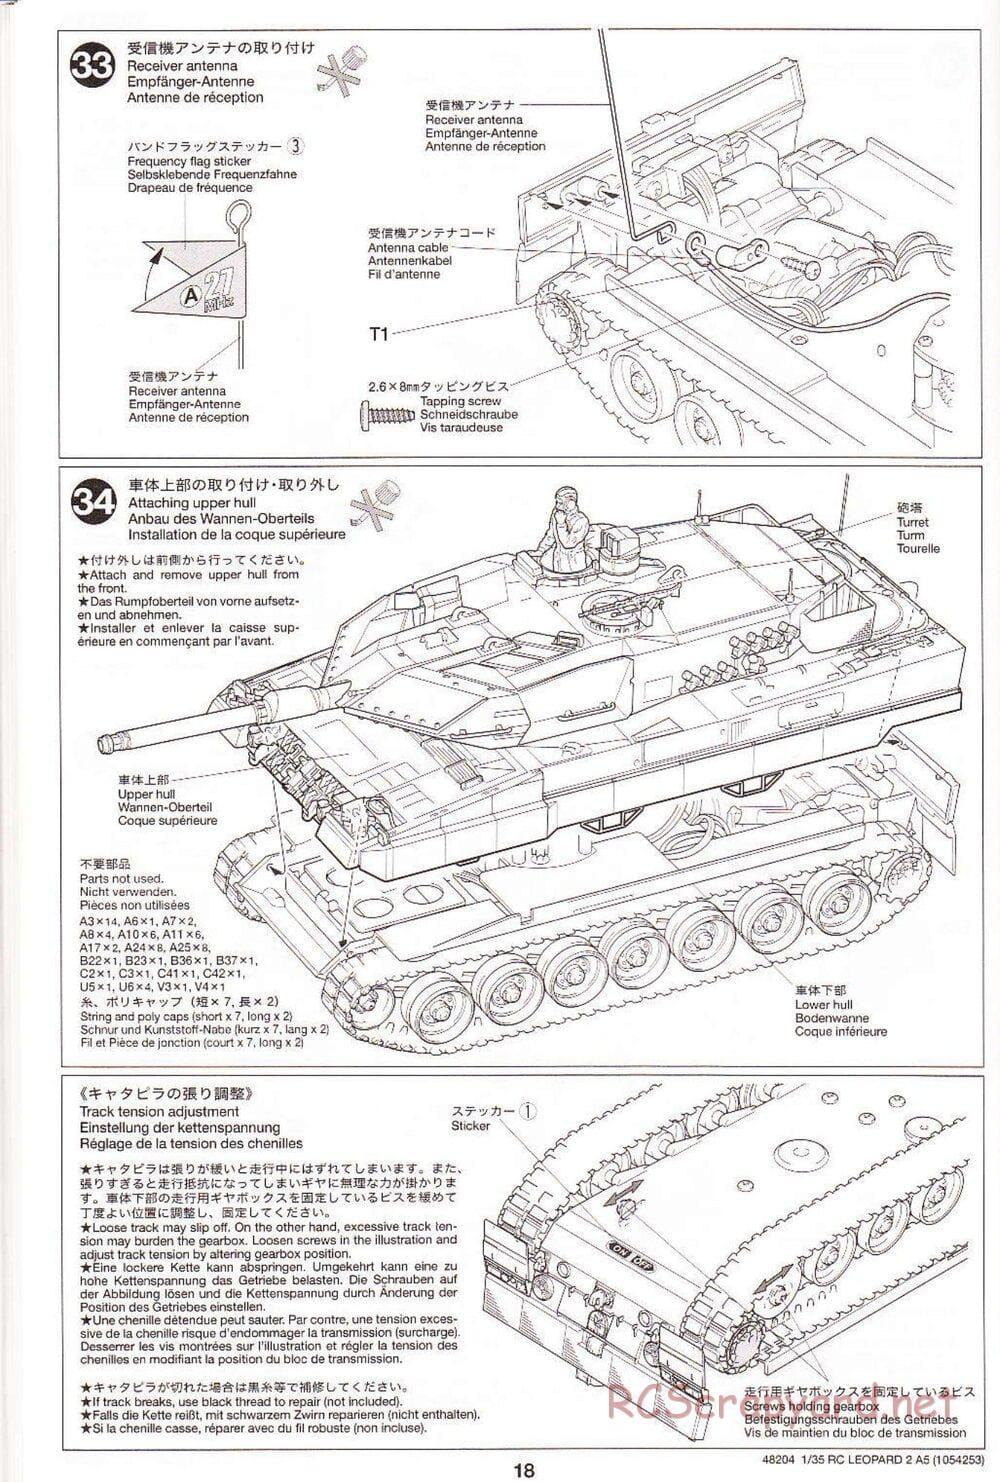 Tamiya - Leopard 2 A5 Main Battle Tank - 1/35 Scale Chassis - Manual - Page 18